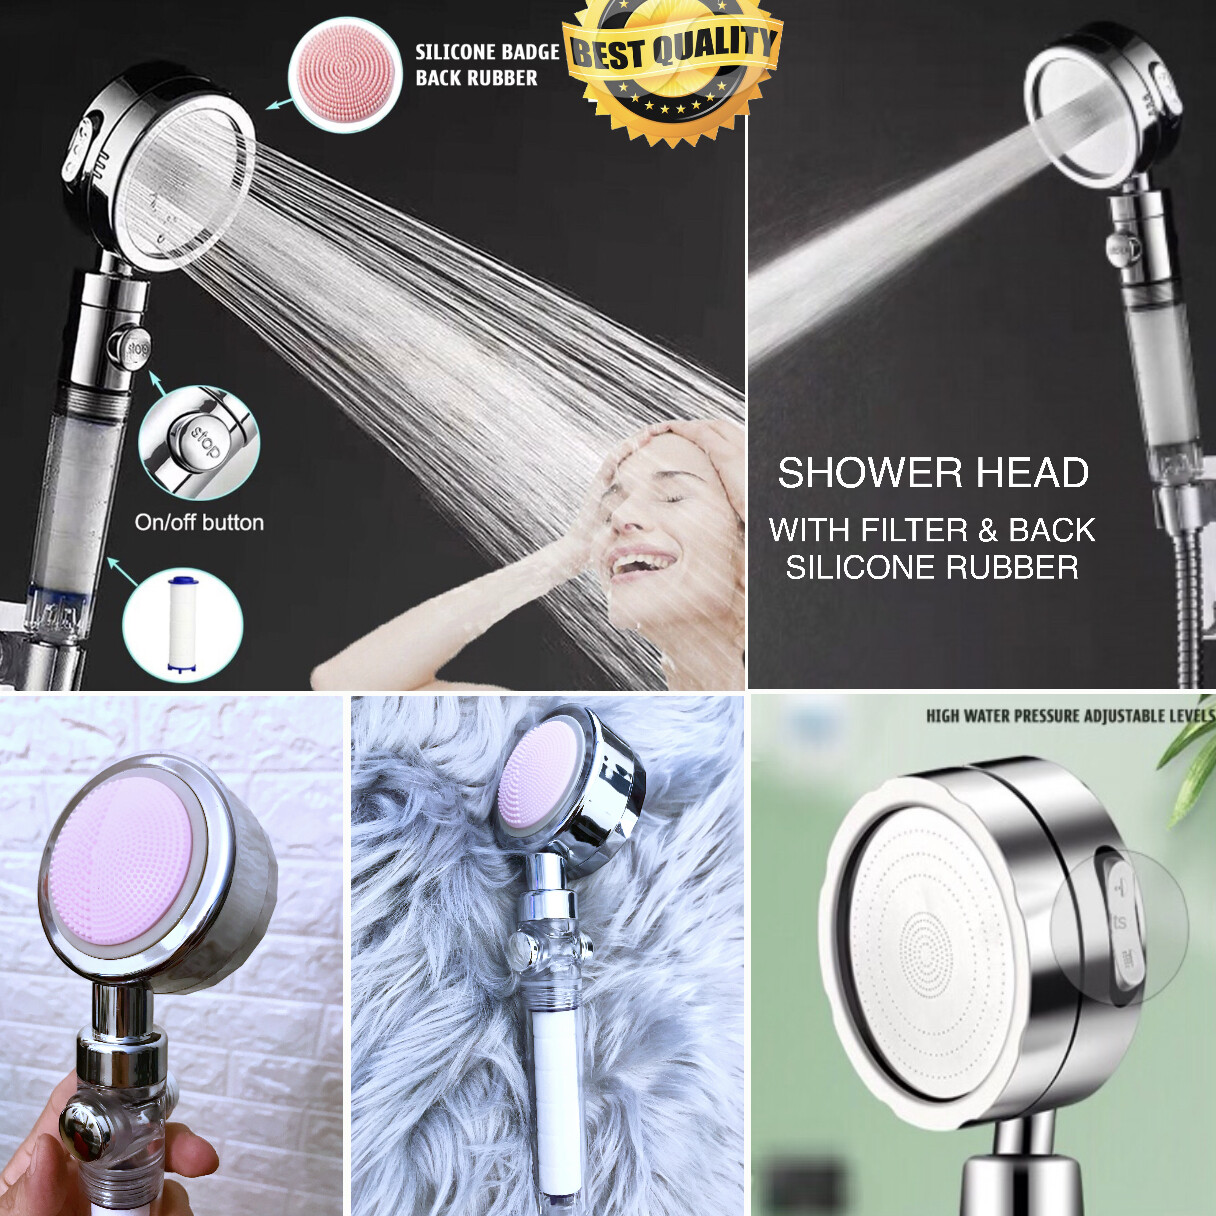 Silicone Back Shower Head